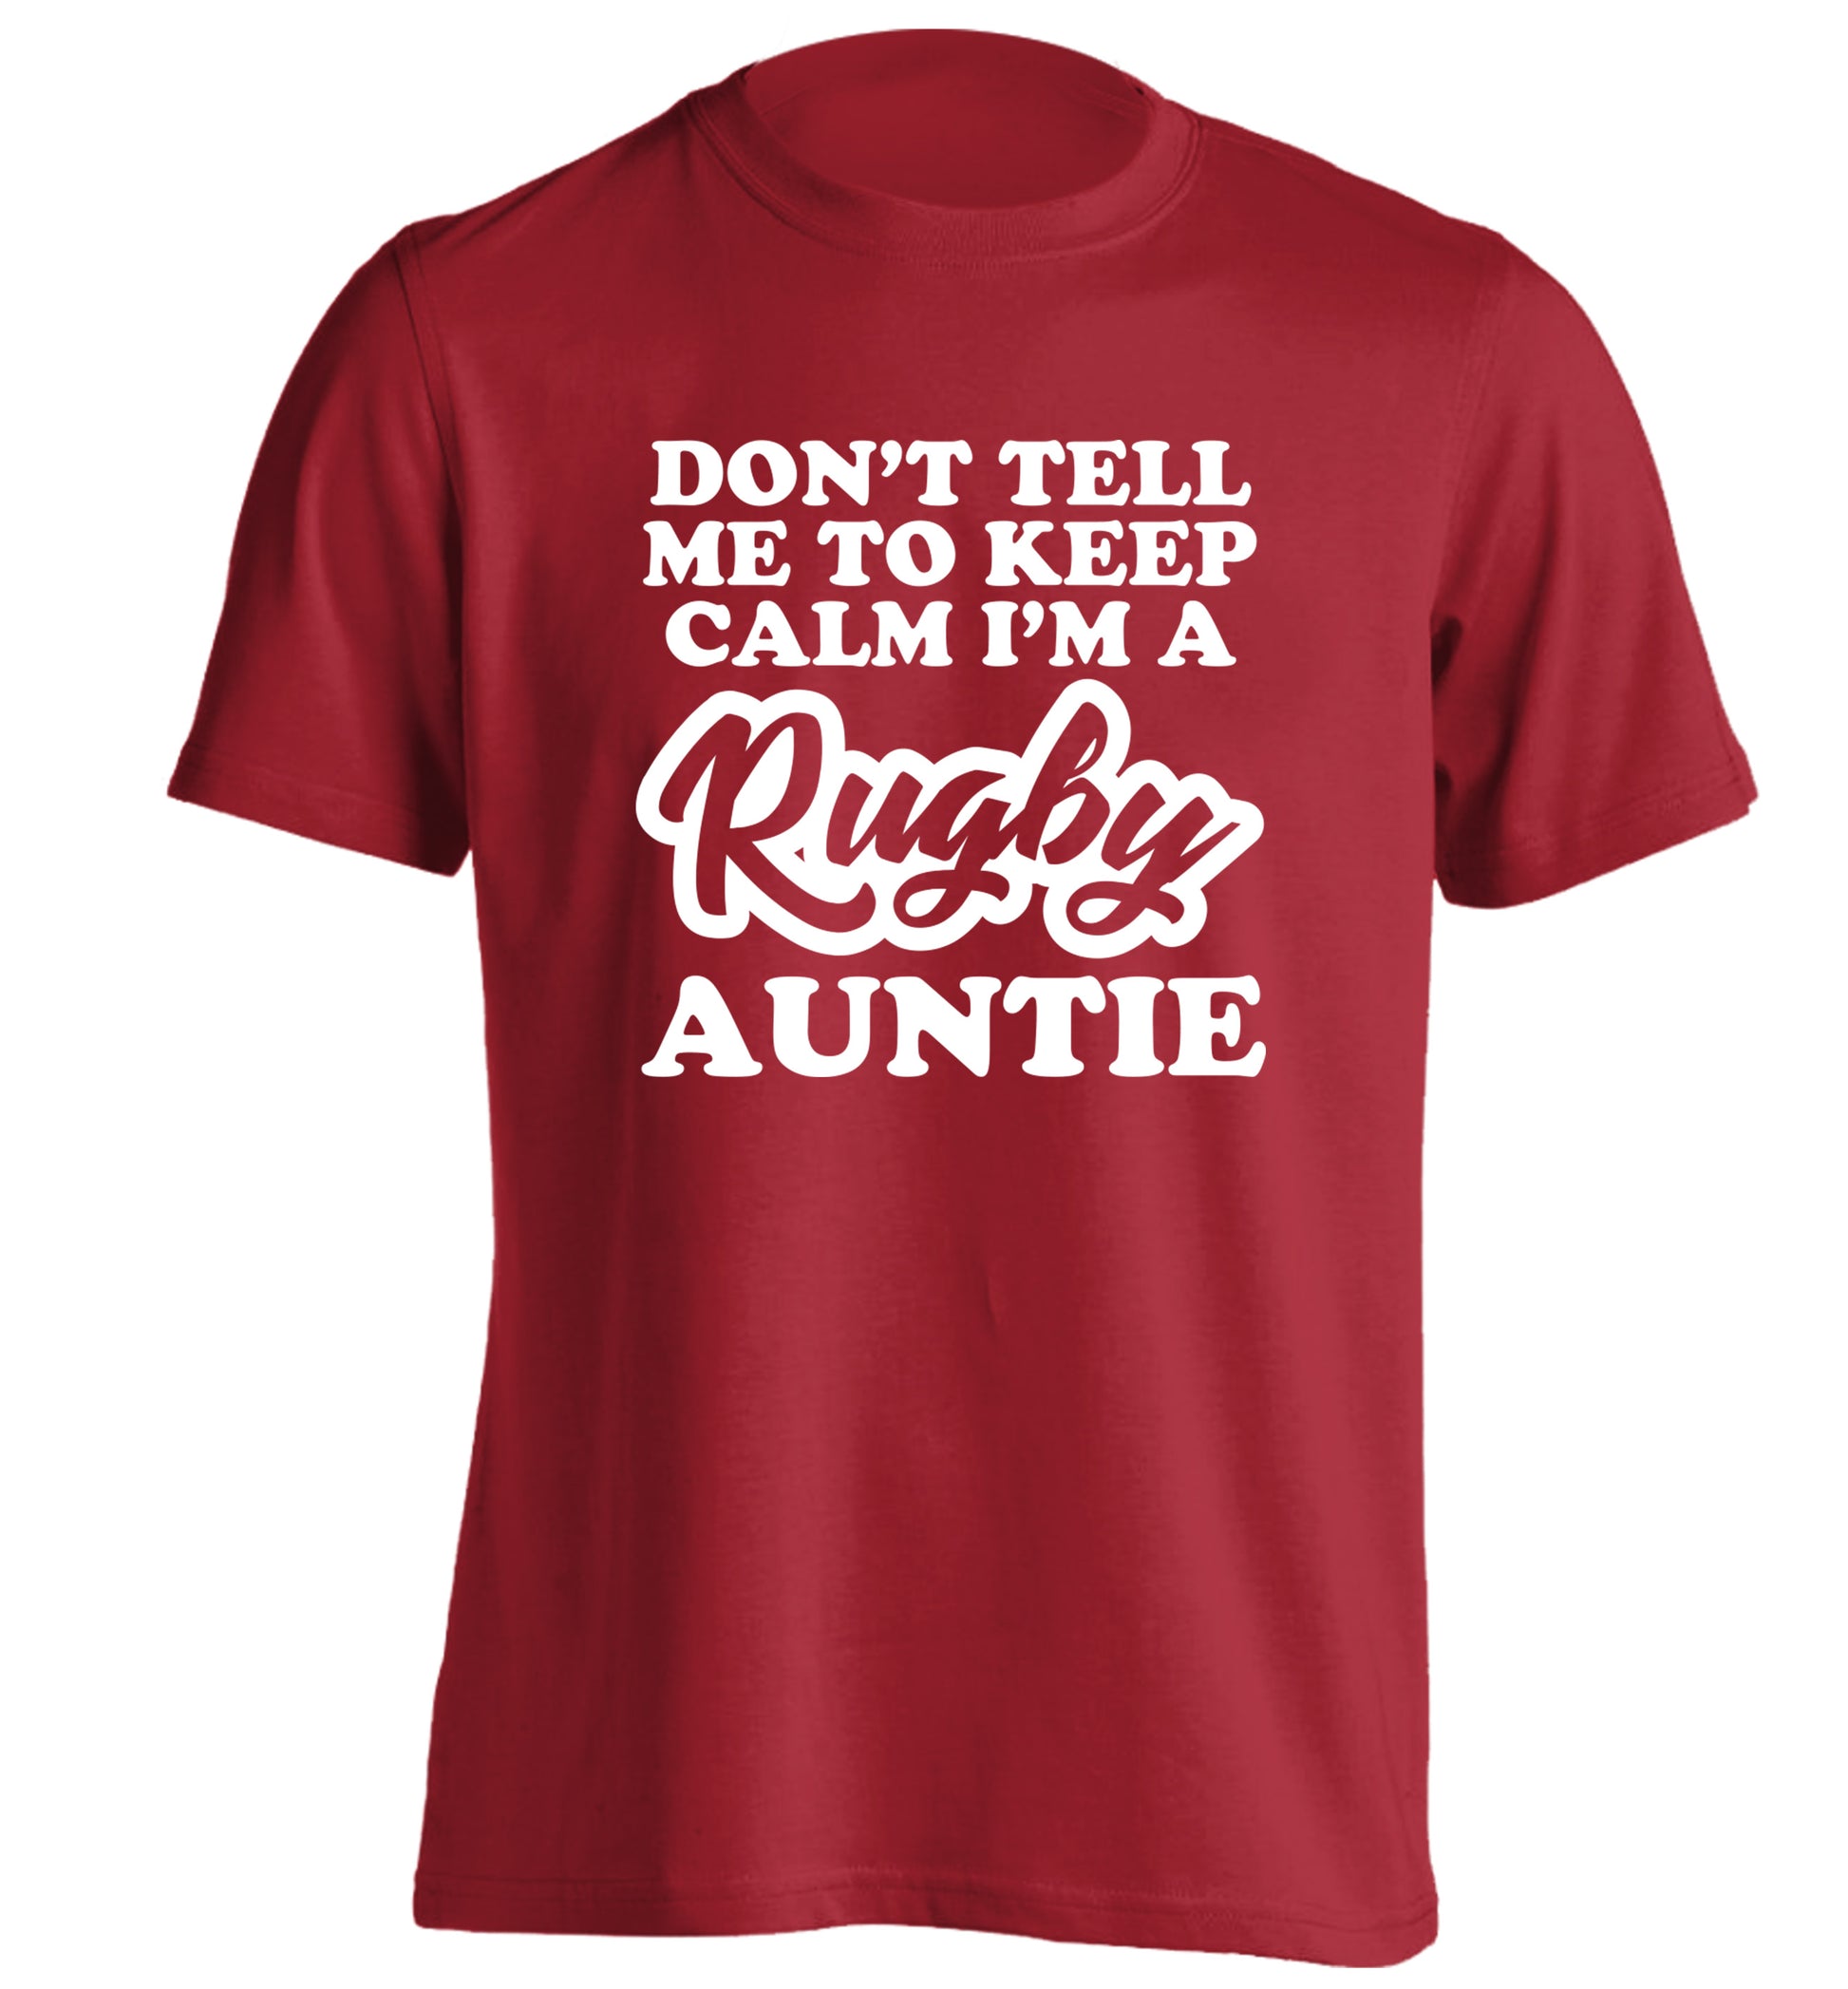 Don't tell me keep calm I'm a rugby auntie adults unisex red Tshirt 2XL